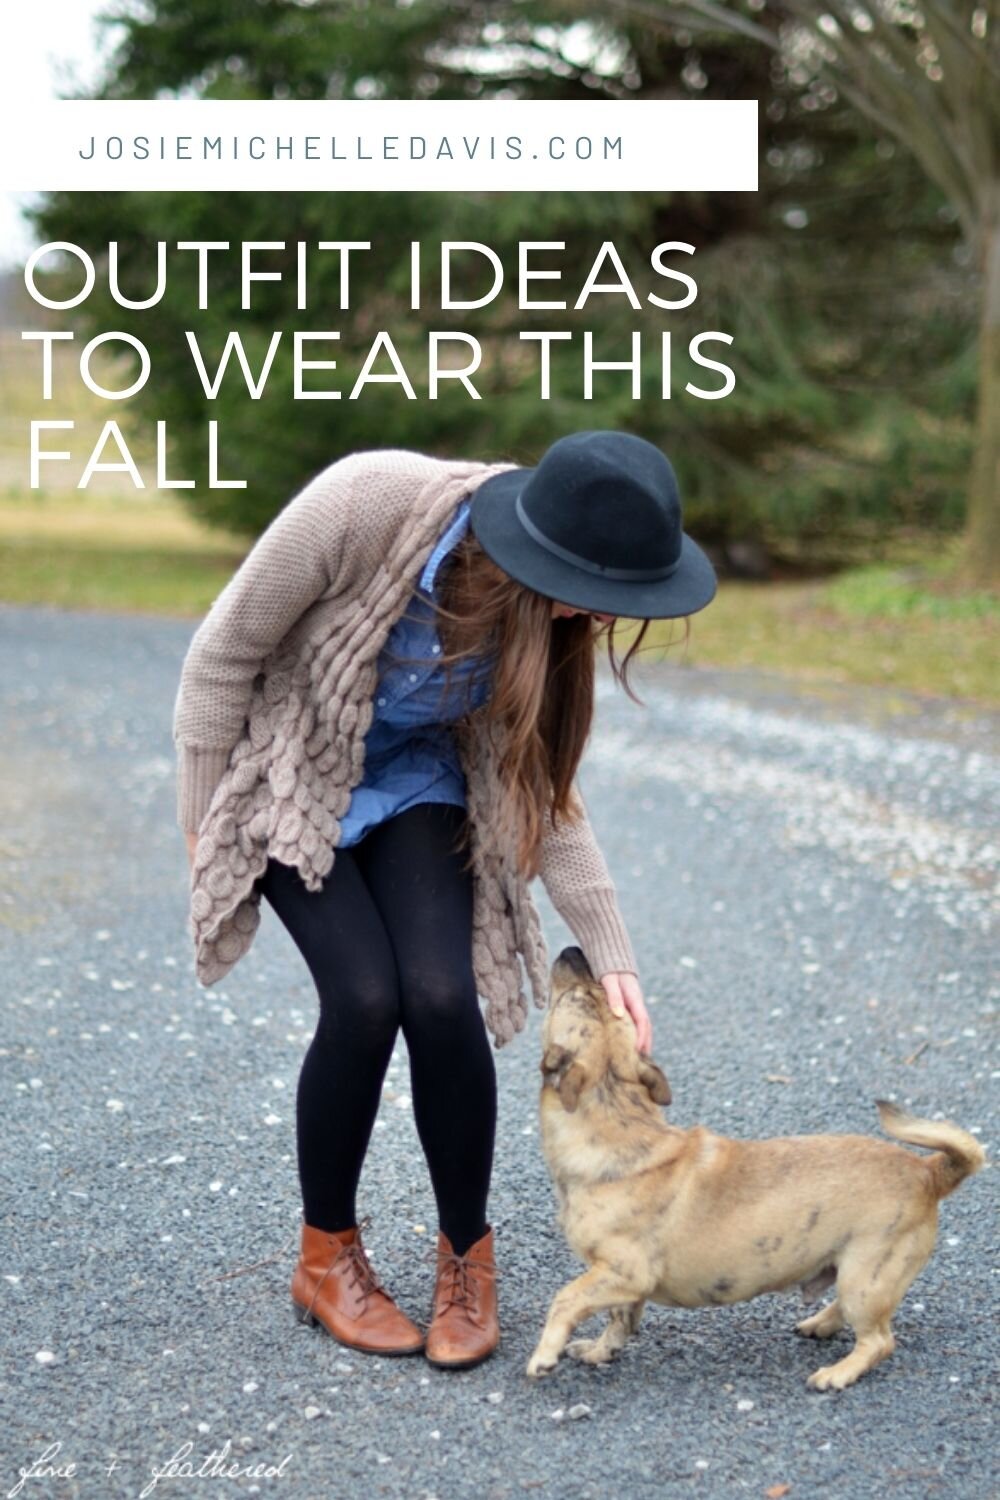 Outfits to try out this fall